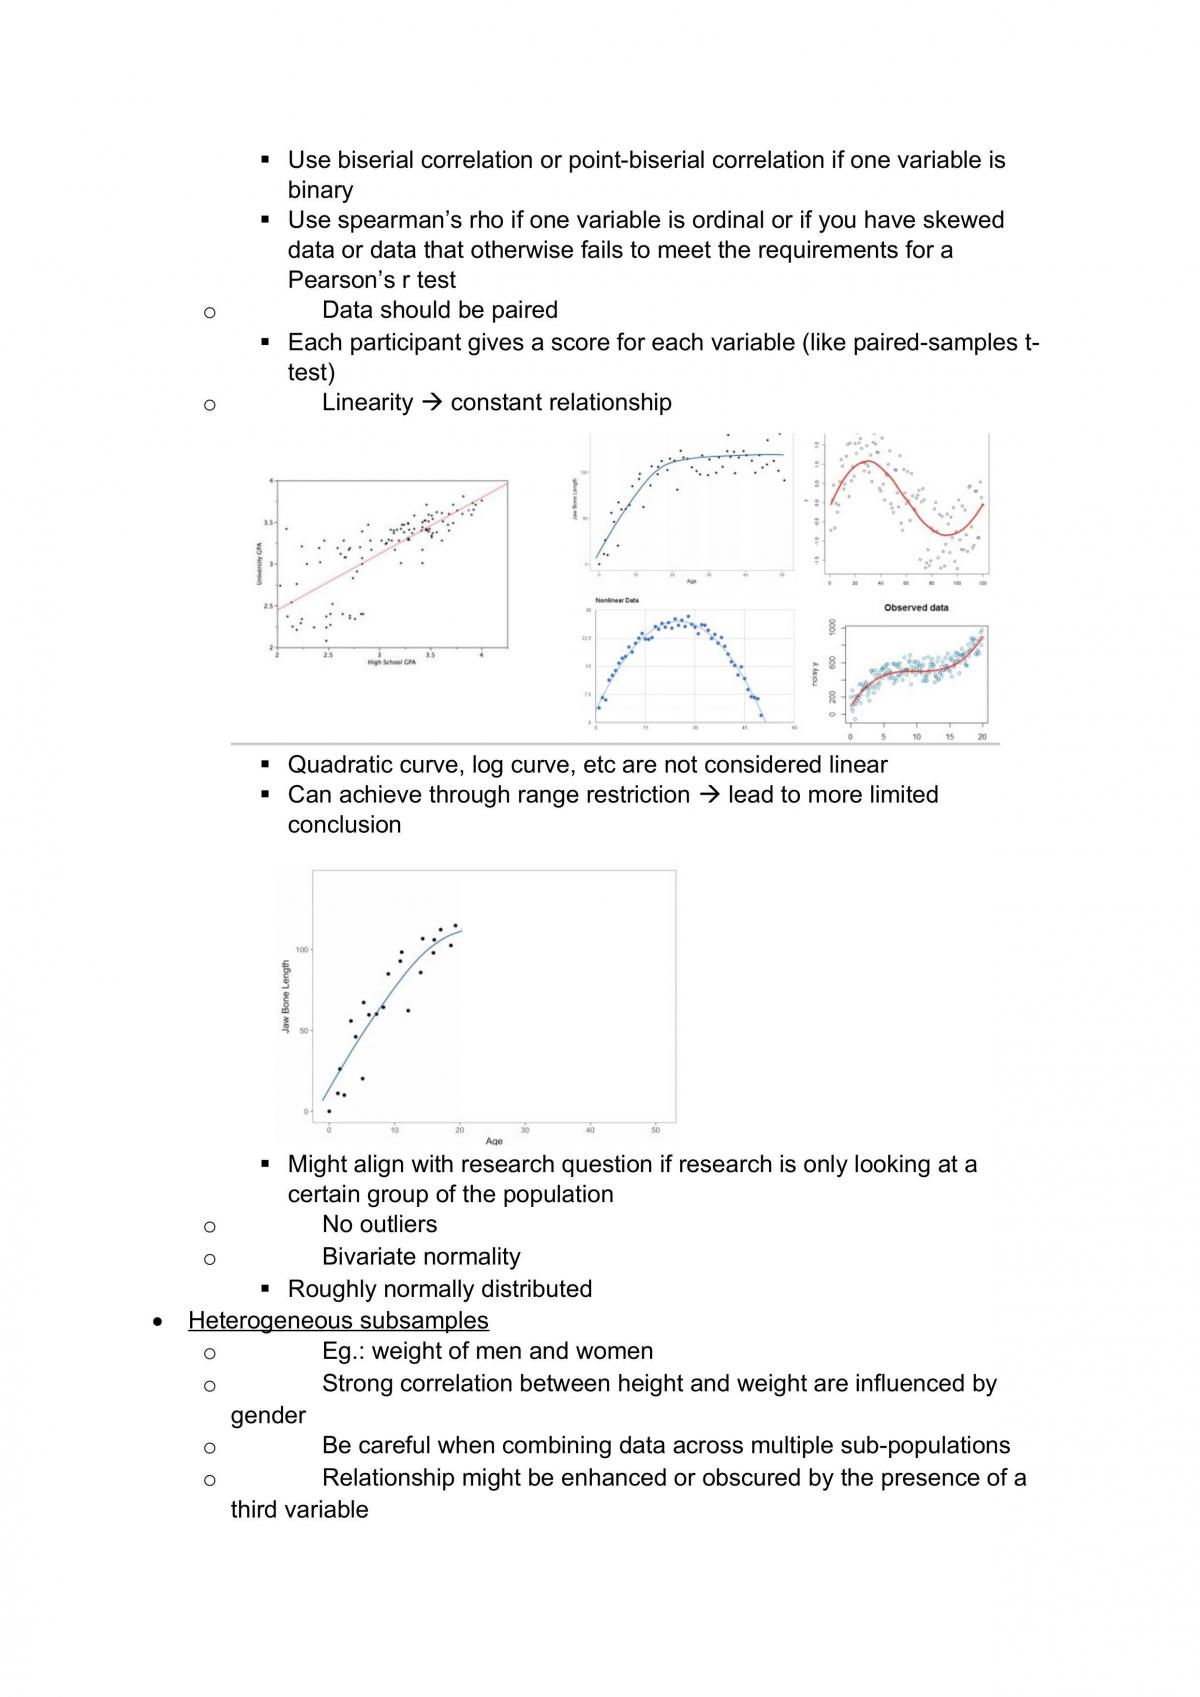 PL2131 Lecture notes, PL2131 - Research and Statistical Methods I - NUS